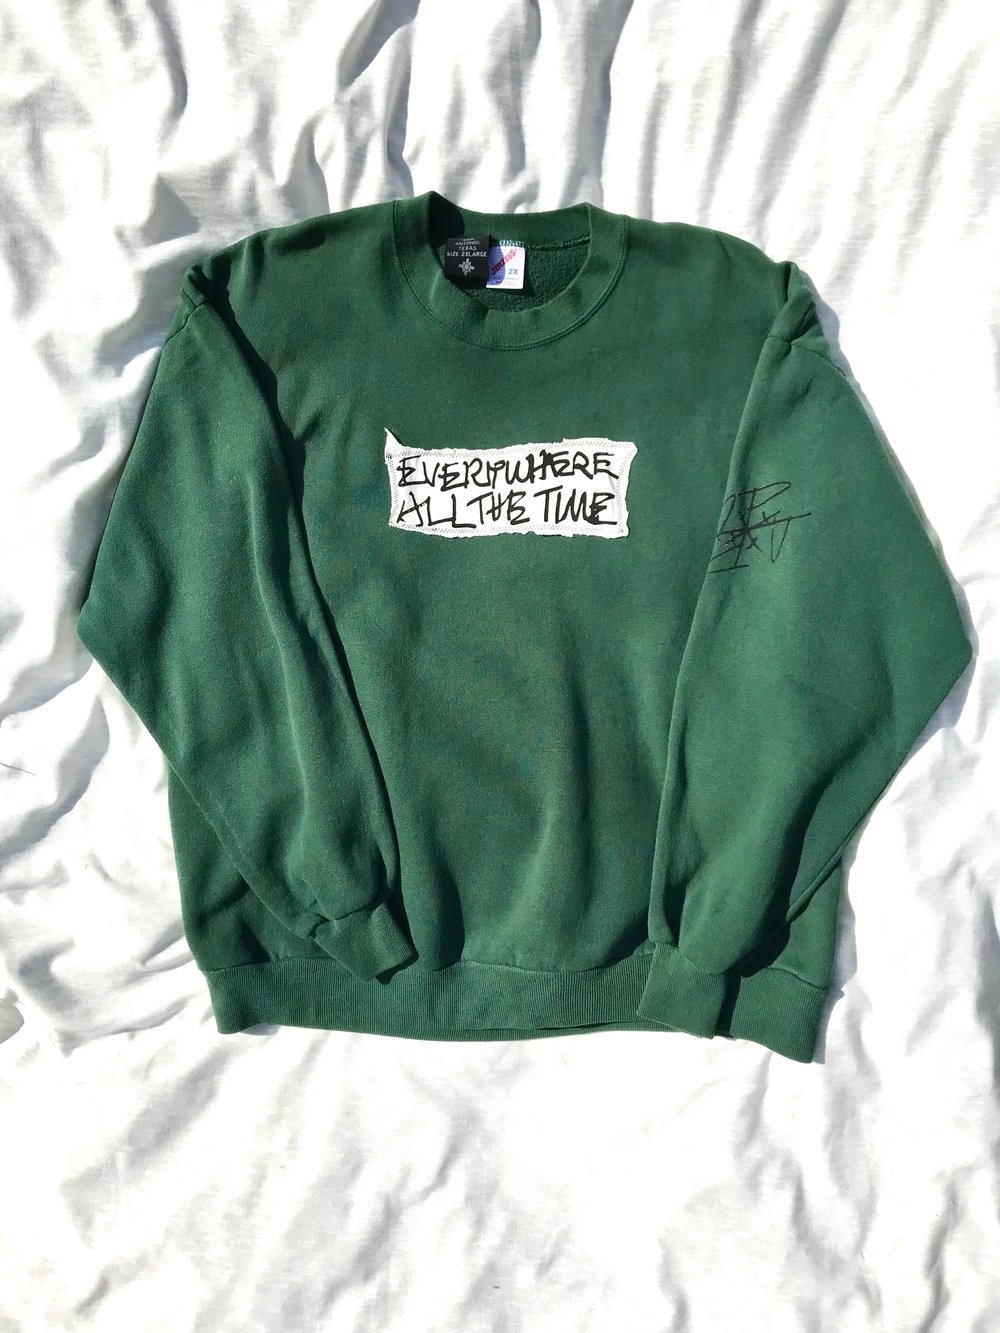 DWS dude sweater in forest green 